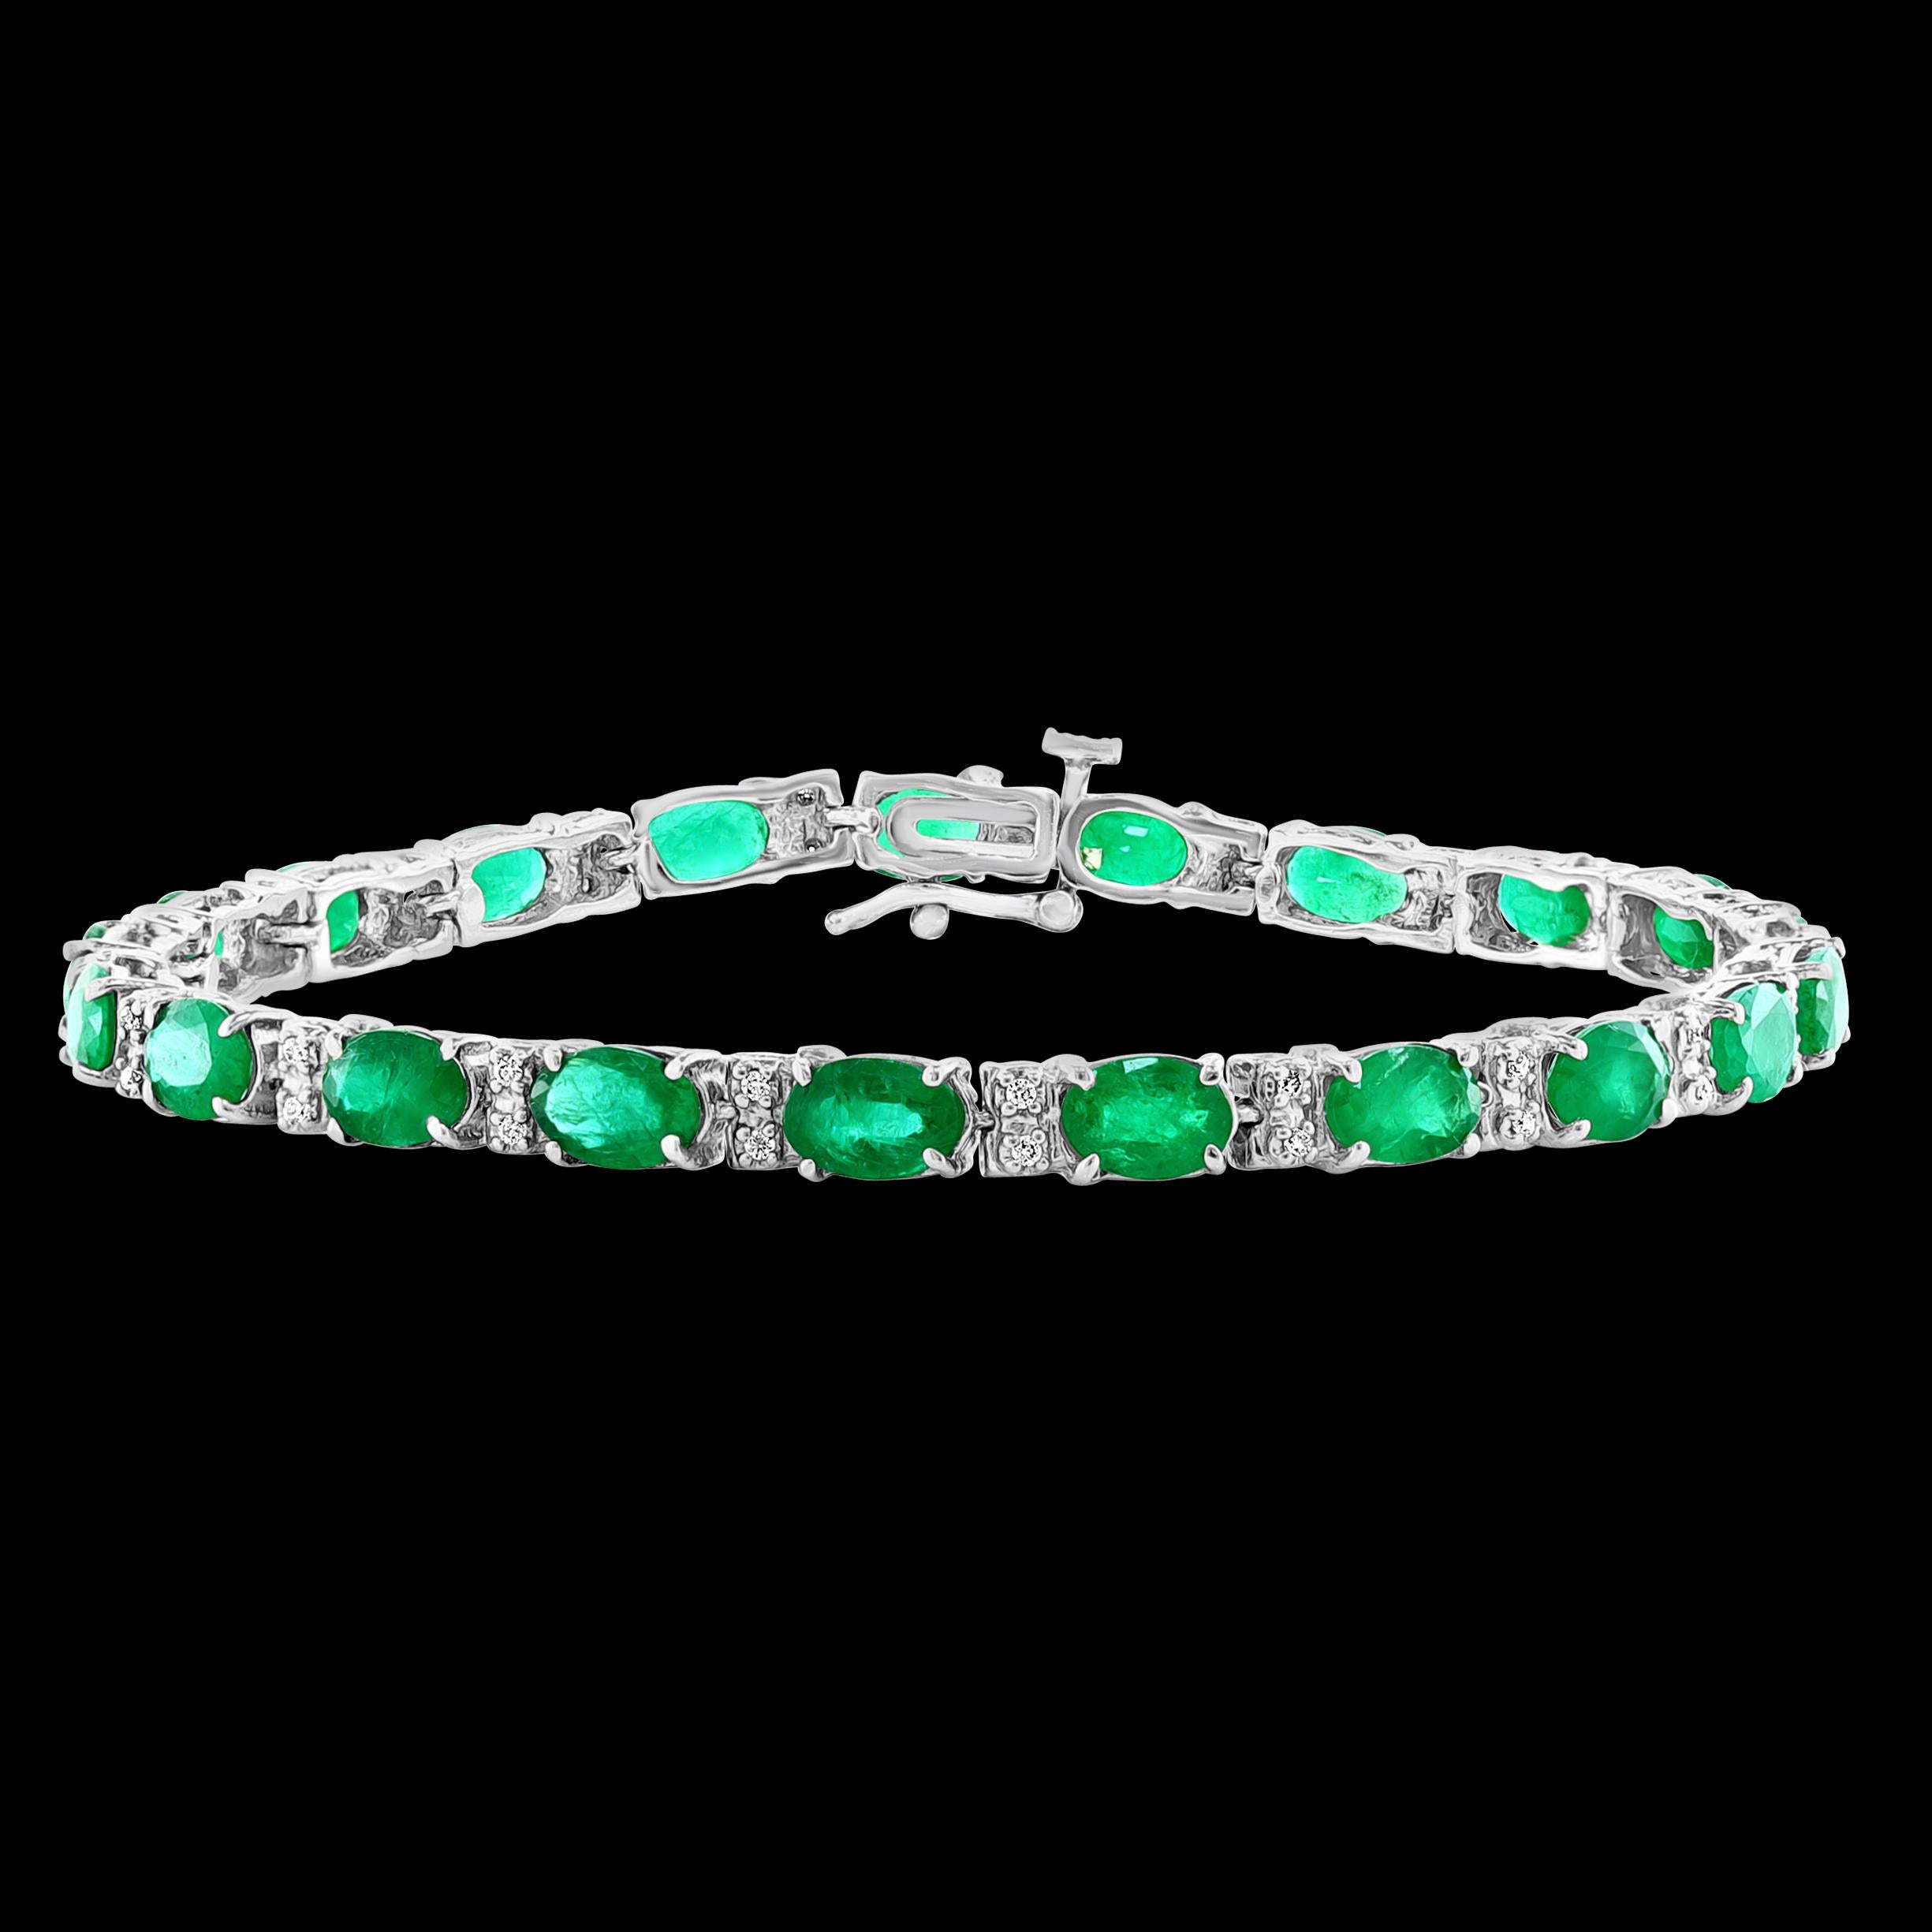  This exceptionally affordable Tennis  bracelet has  21 stones of oval  Emeralds  . Each Emerald is spaced by two diamonds . Total weight of the Emeralds is  approximately 9 carat. Total number of diamonds are 42  and diamond weighs is 0.80 ct.
The